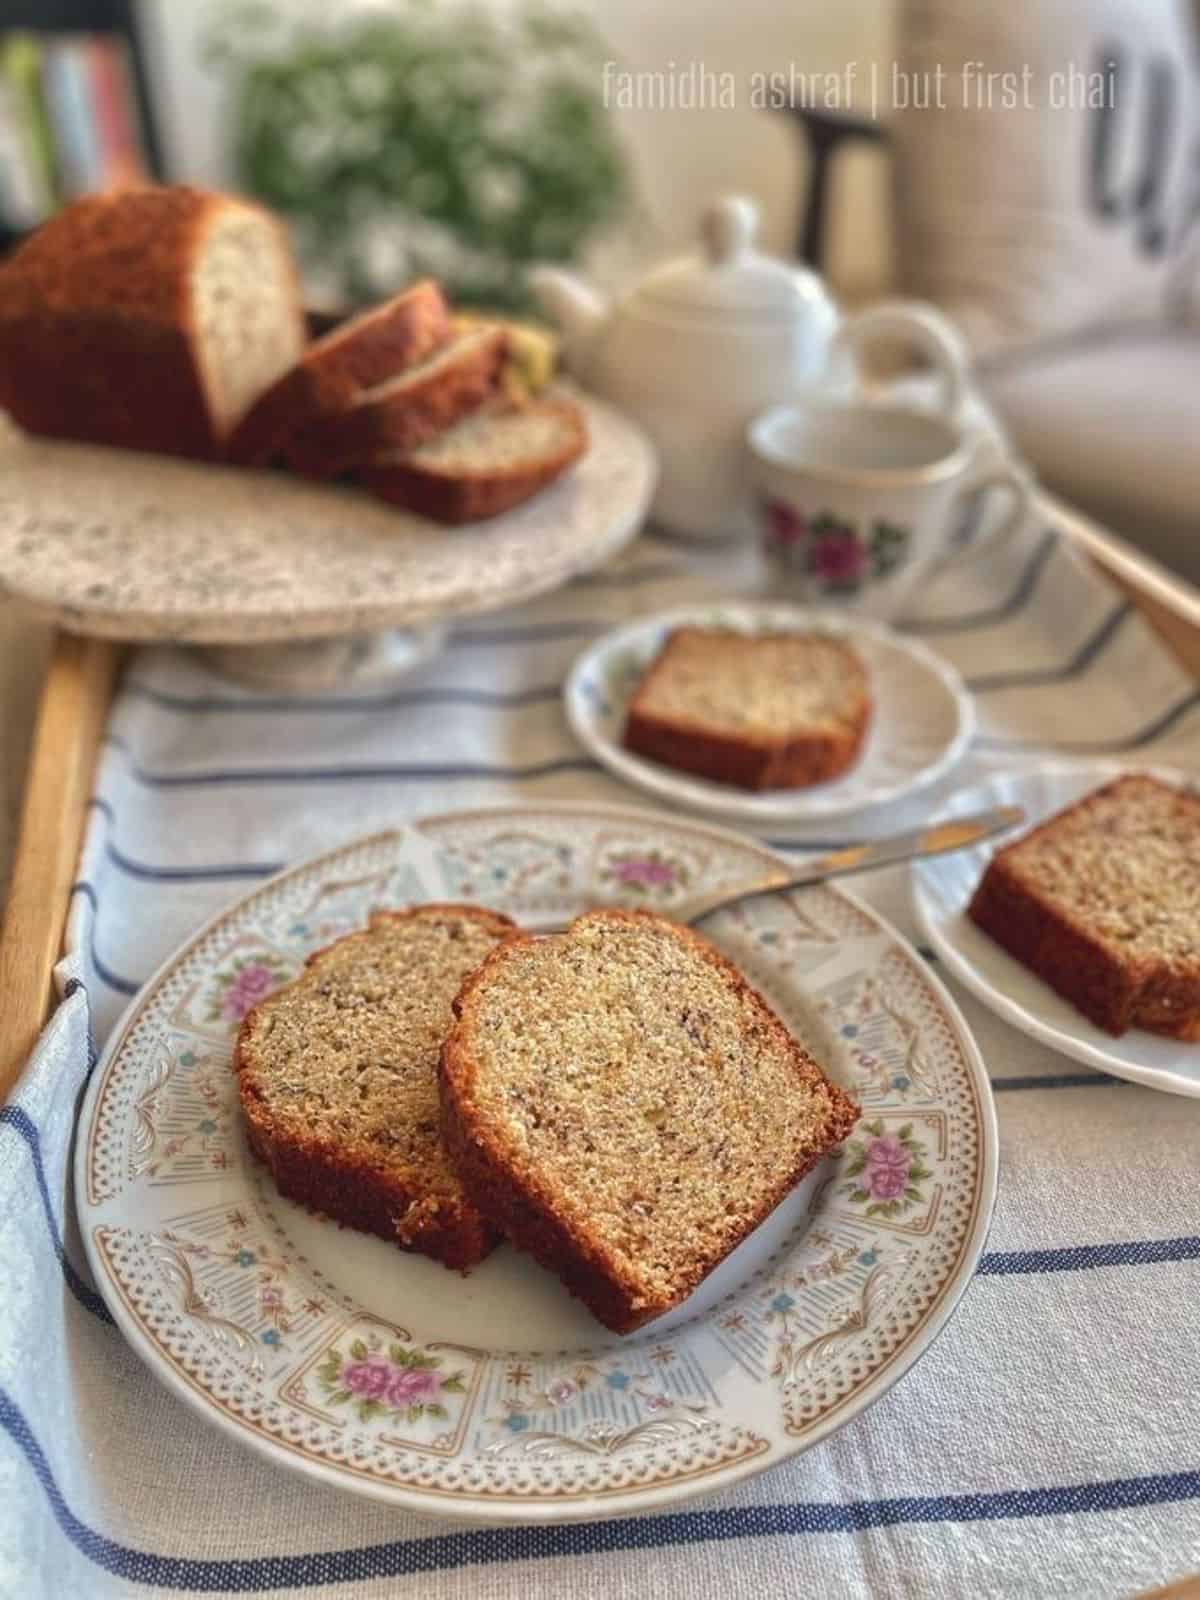 Two mini banana bread loaves sliced and served